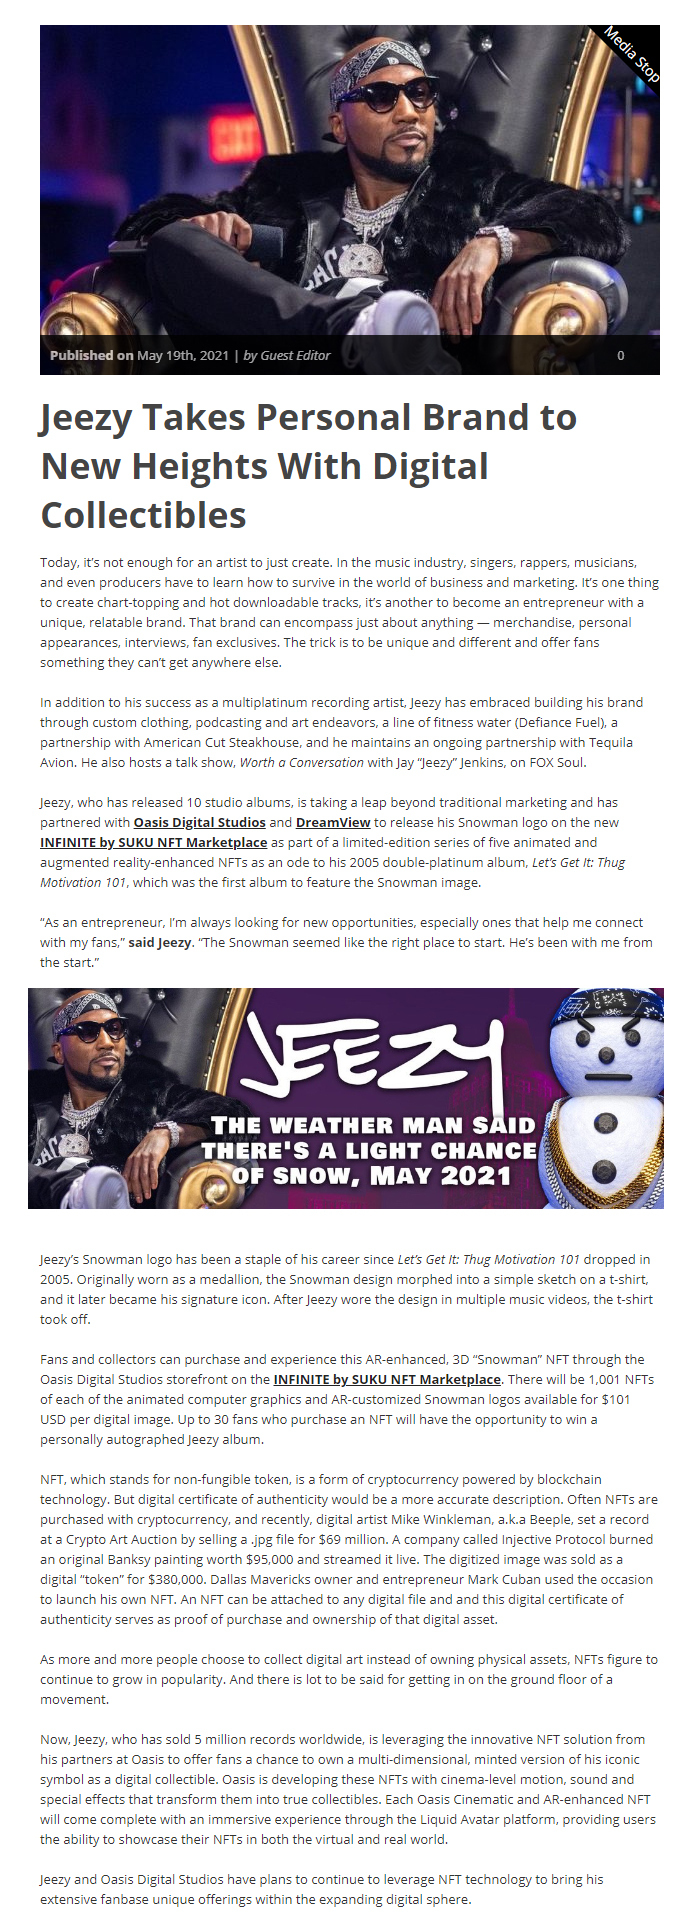 Jeezy takes Personal Brand to new Heights With Digital Collectibles